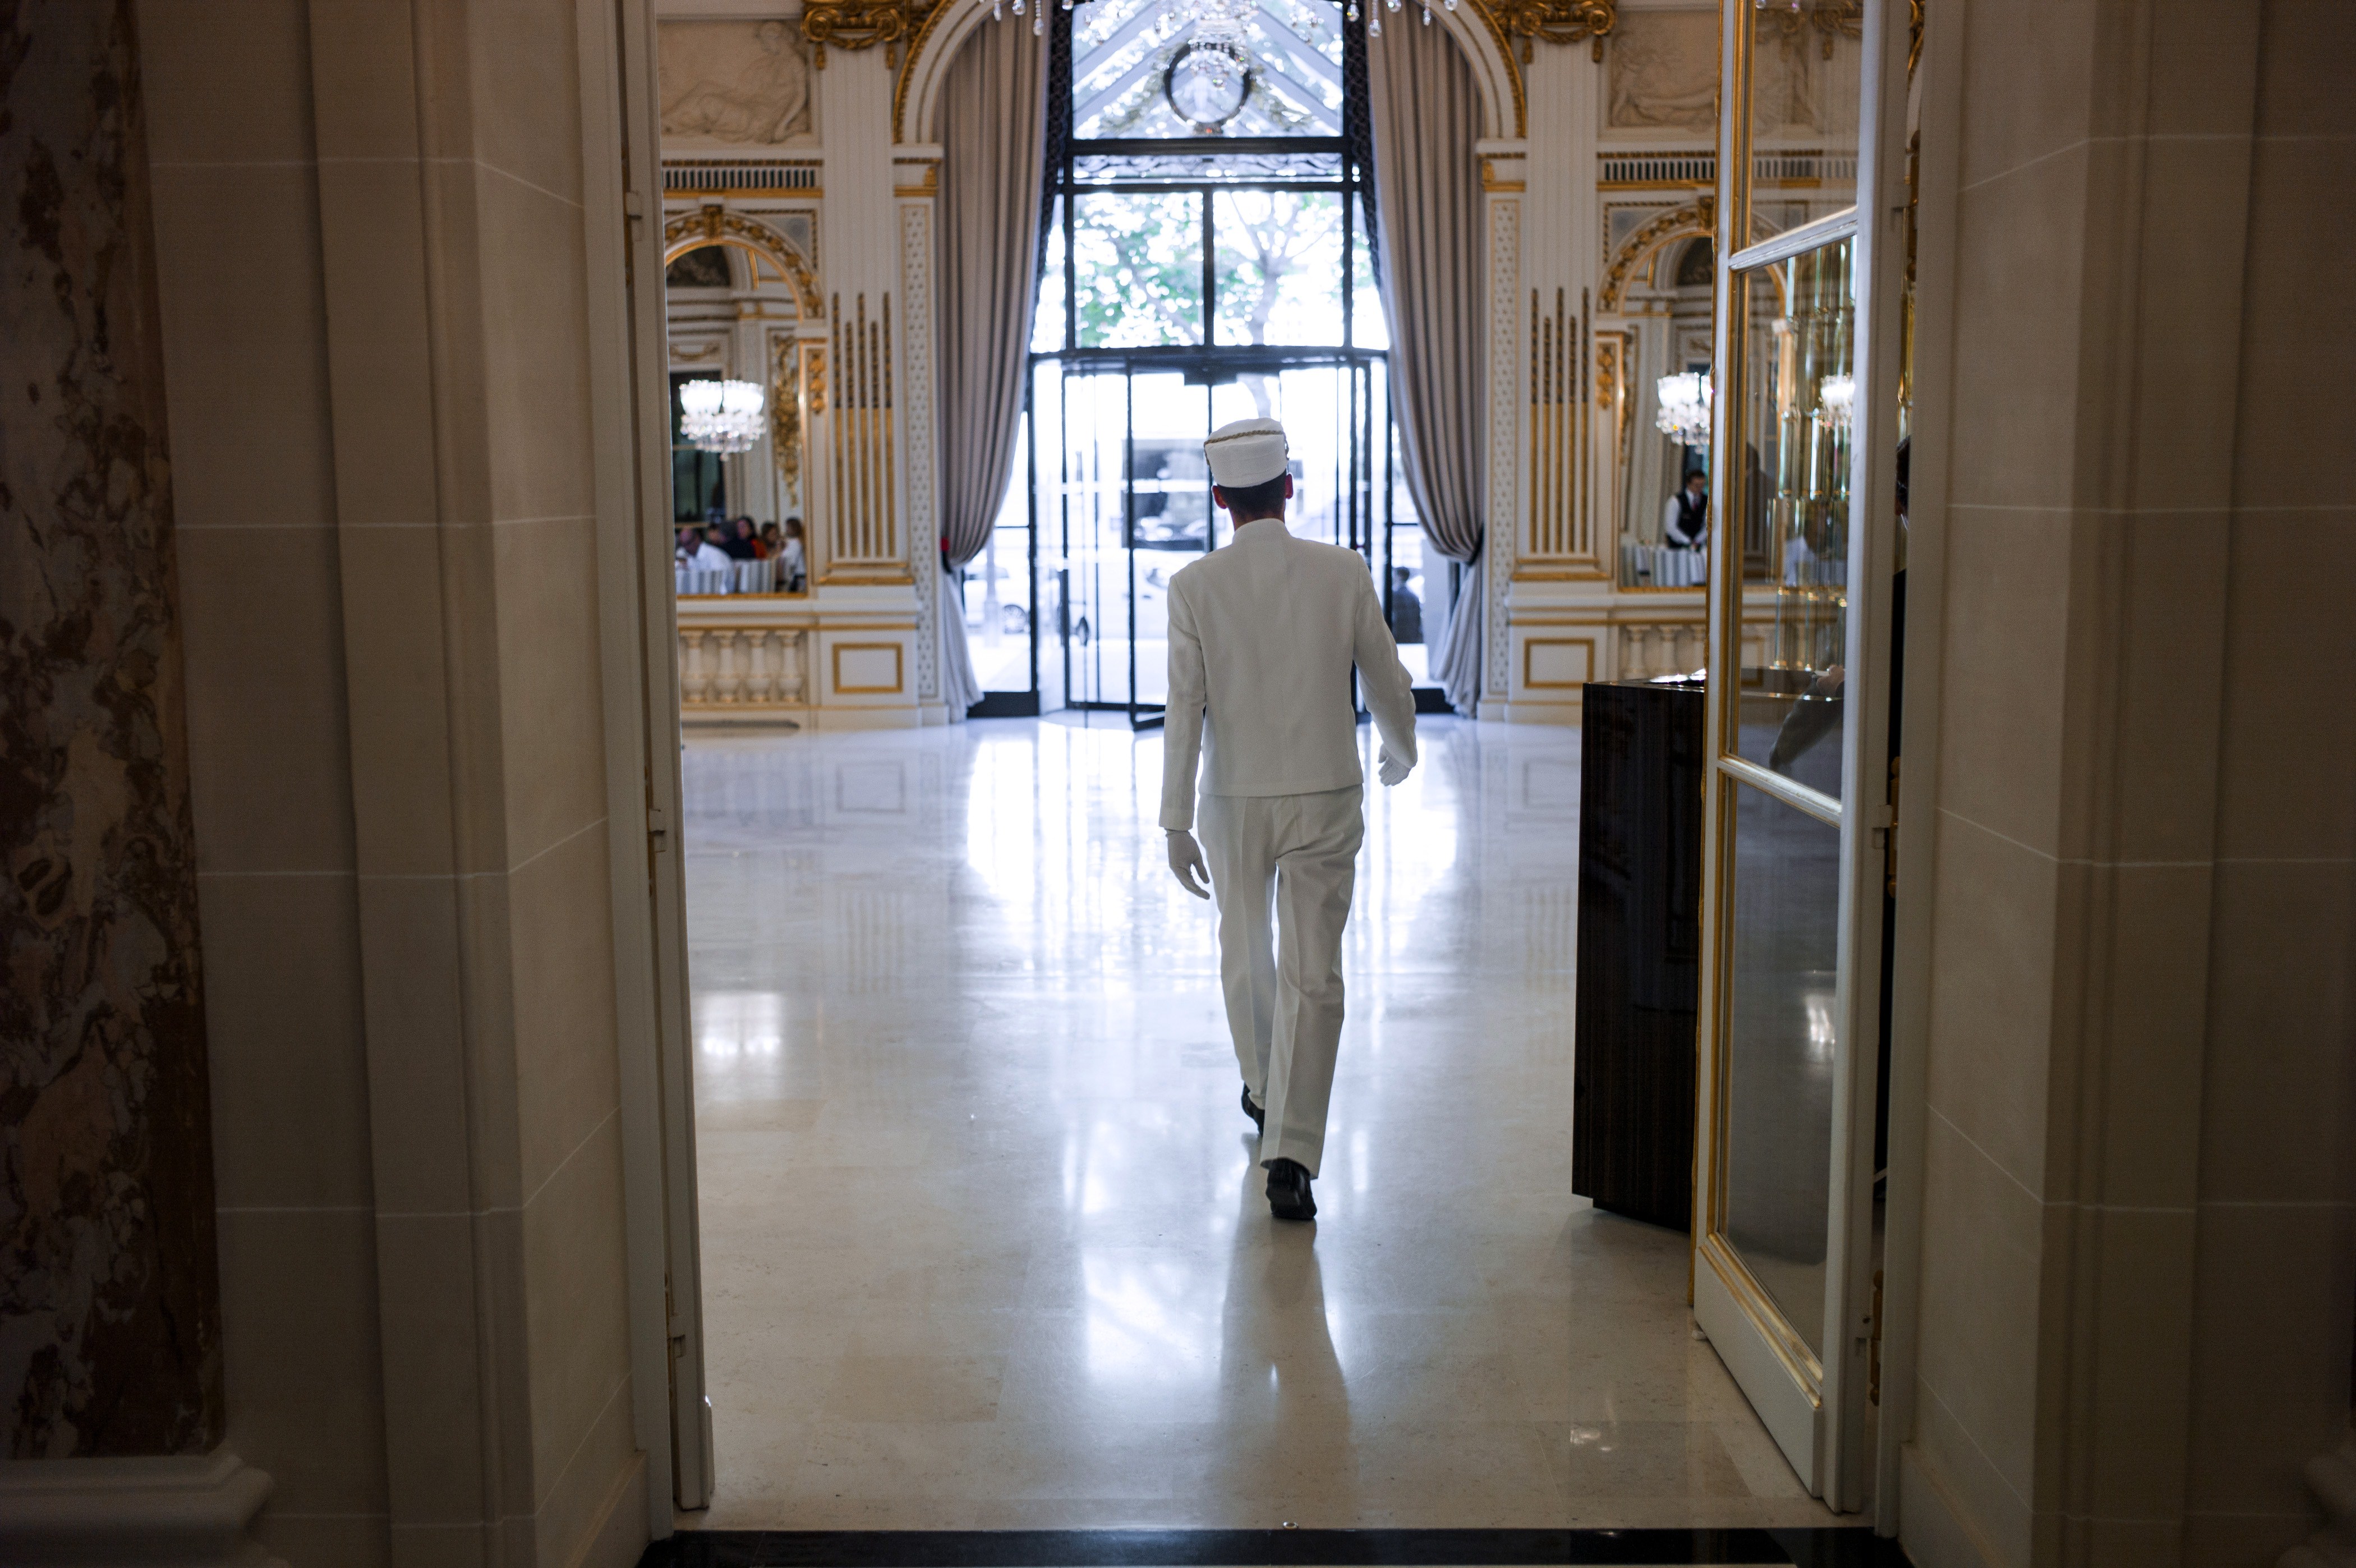 A bellhop walks at the entrance of the "The Peninsula Paris" hotel on August 21, 2014 in Paris. (Fred Dufour—AFP/Getty Images)